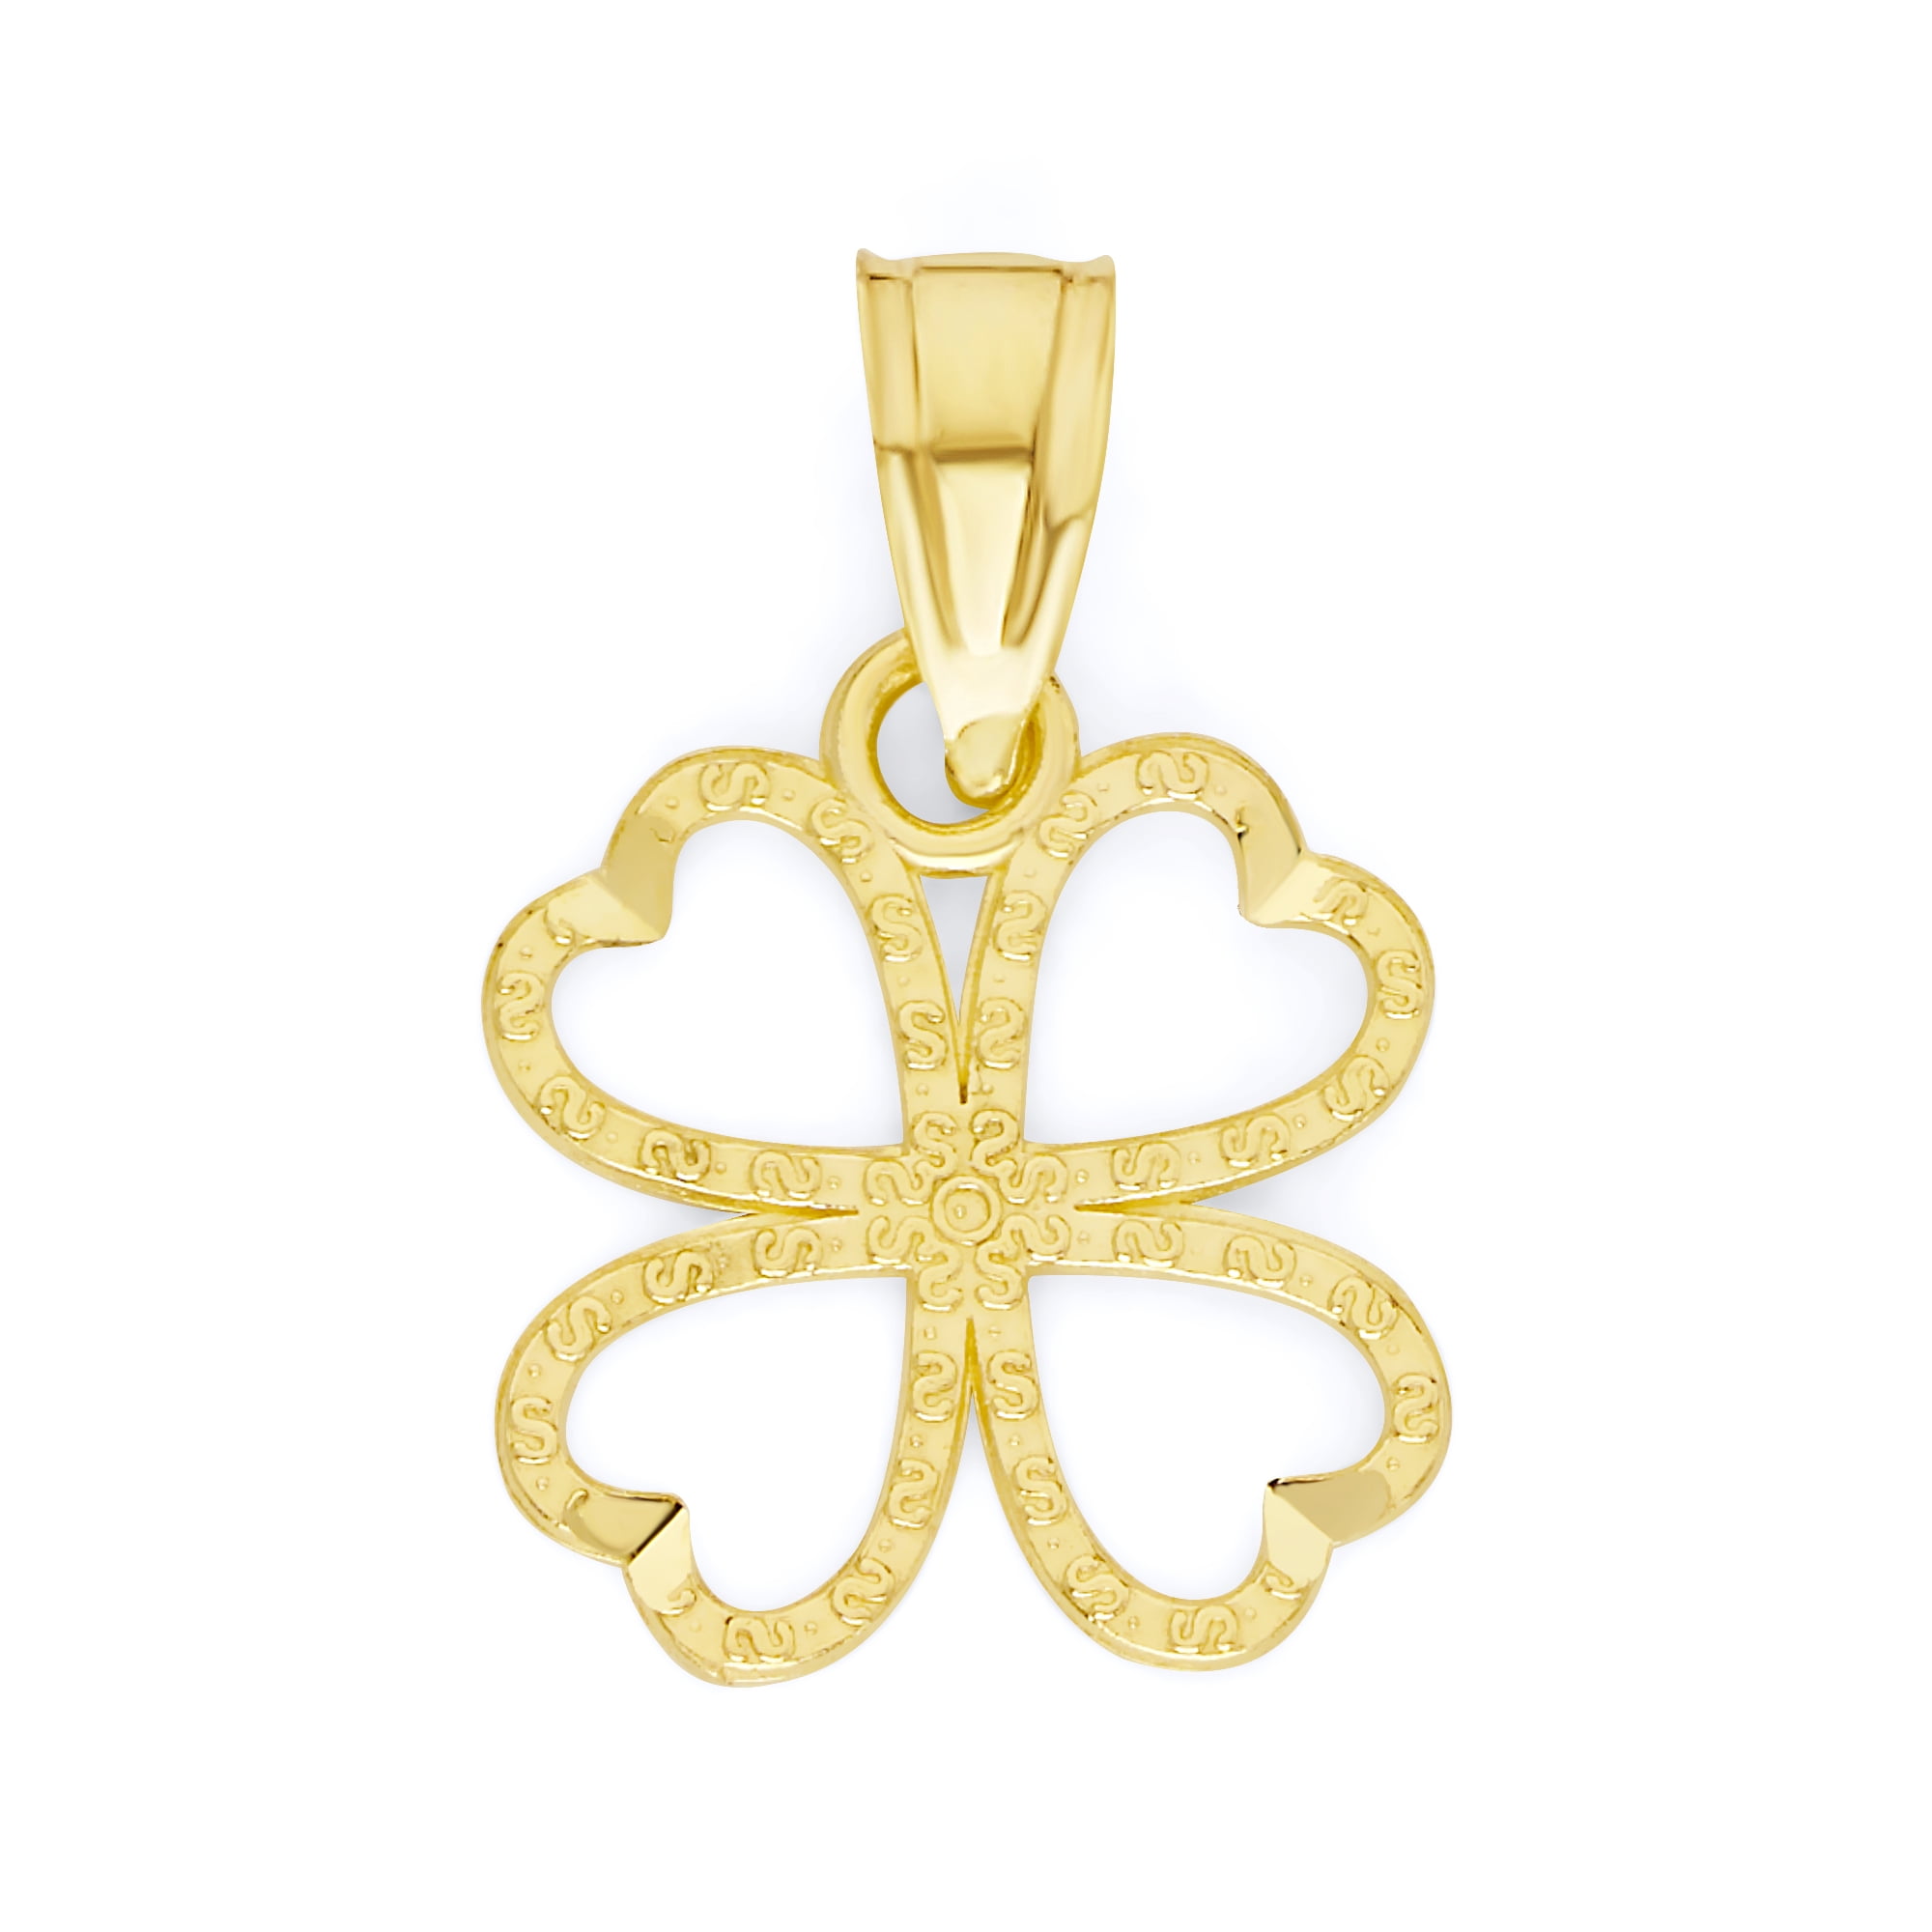 Authentic 10K Yellow Gold Clover Shaped Charm Lucky Amulet Pendant 